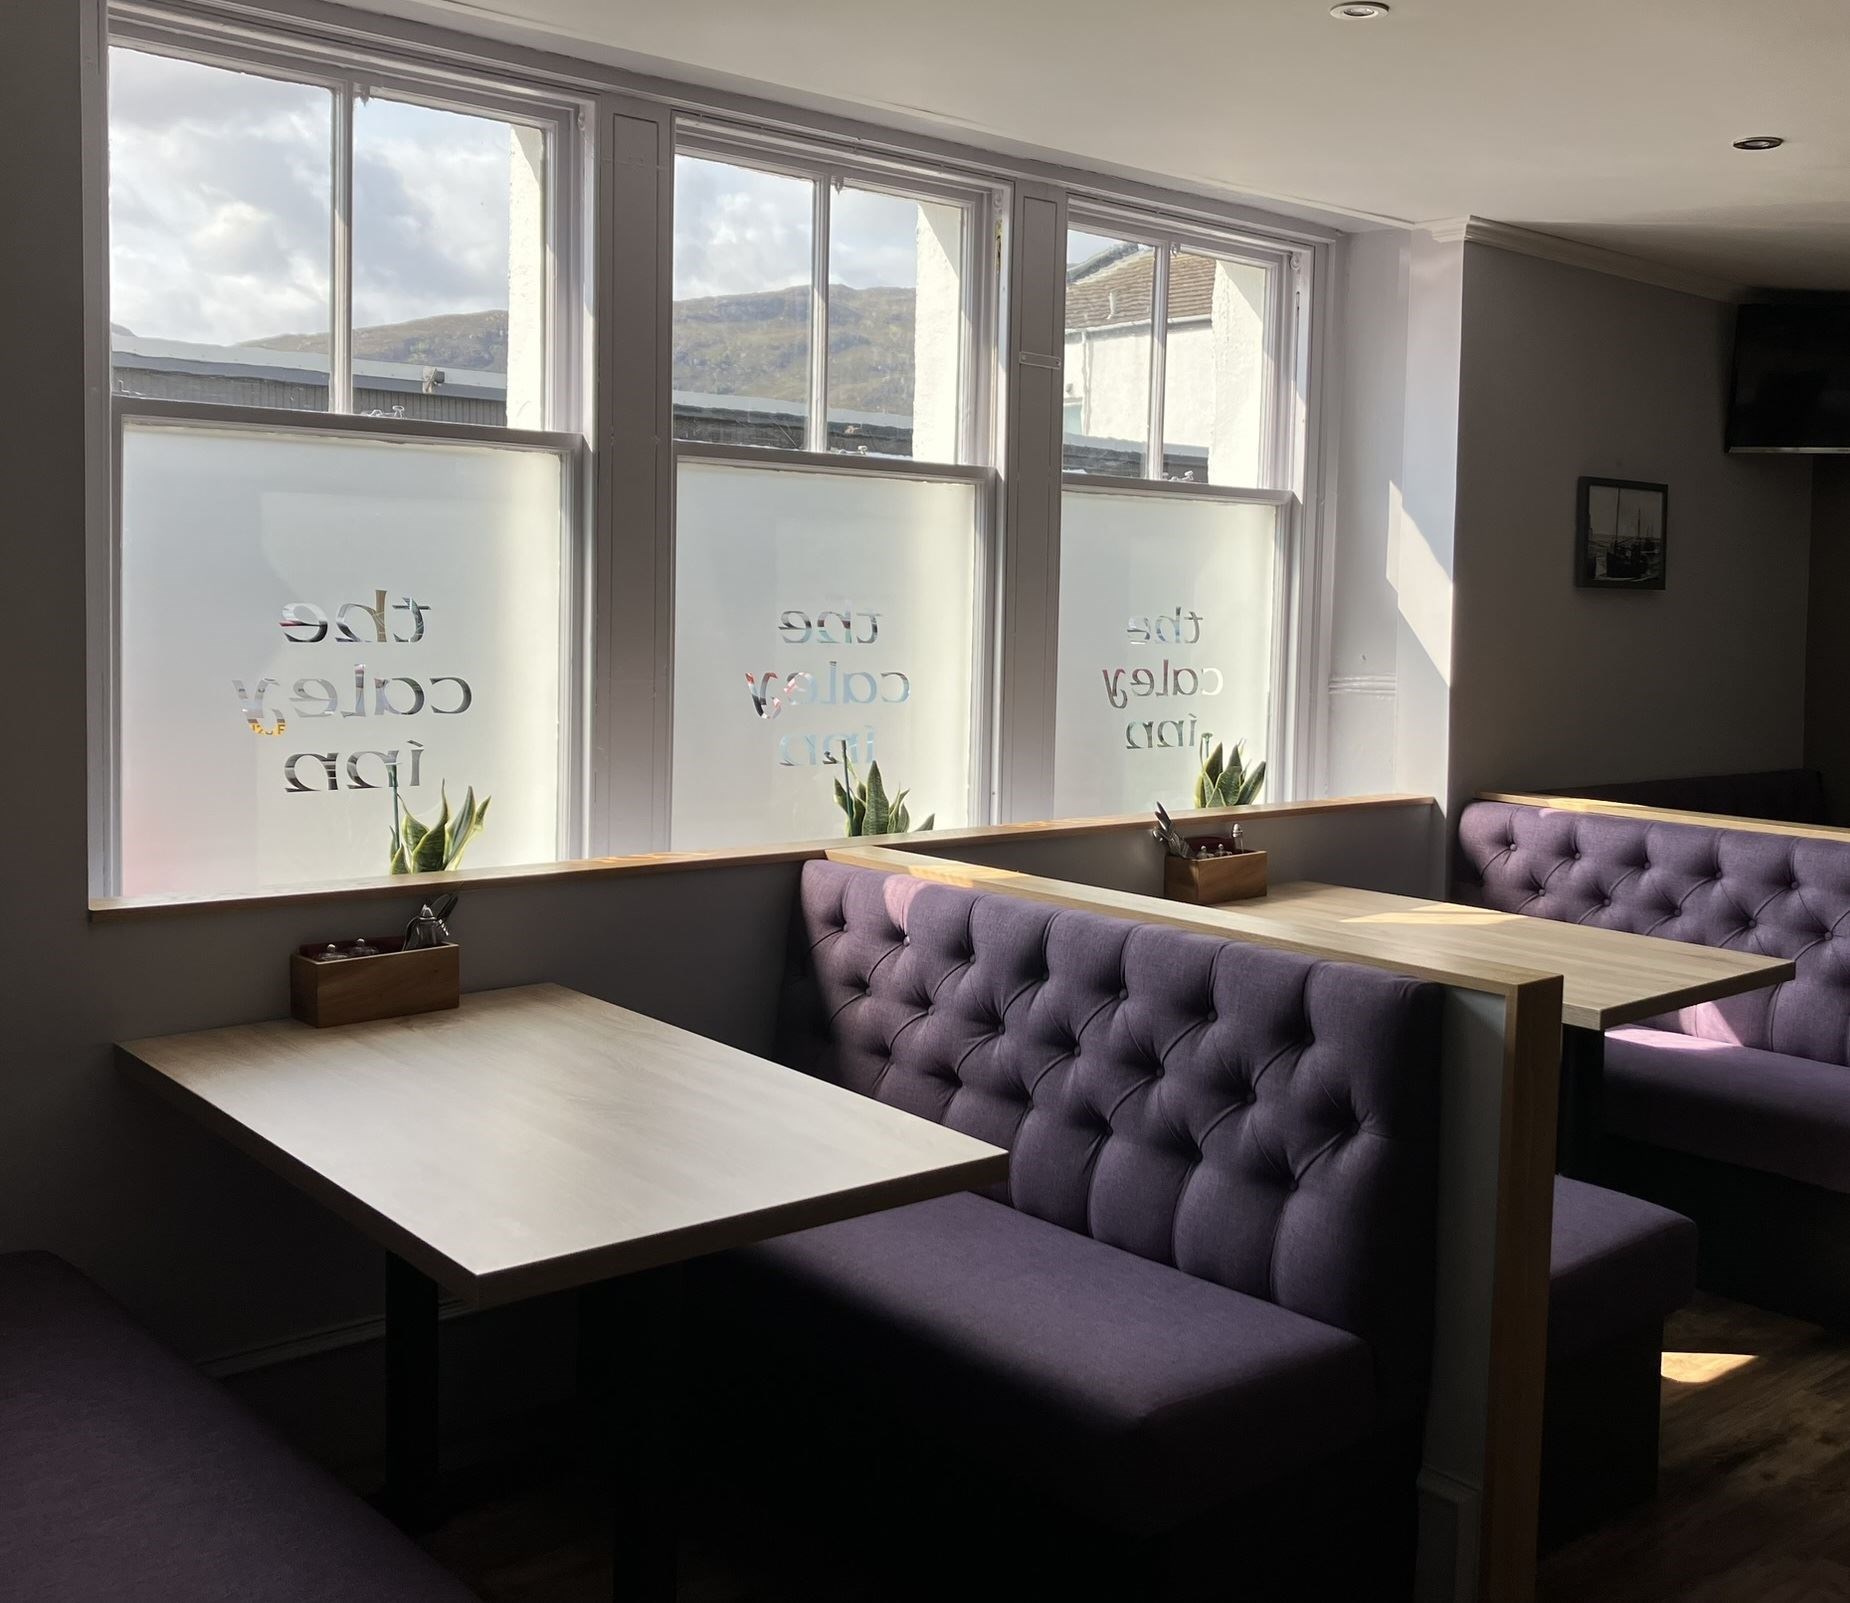 The refurbished bar and restaurant at the Caledonian Hotel, Ullapool. Picture: Iona MacDonald.